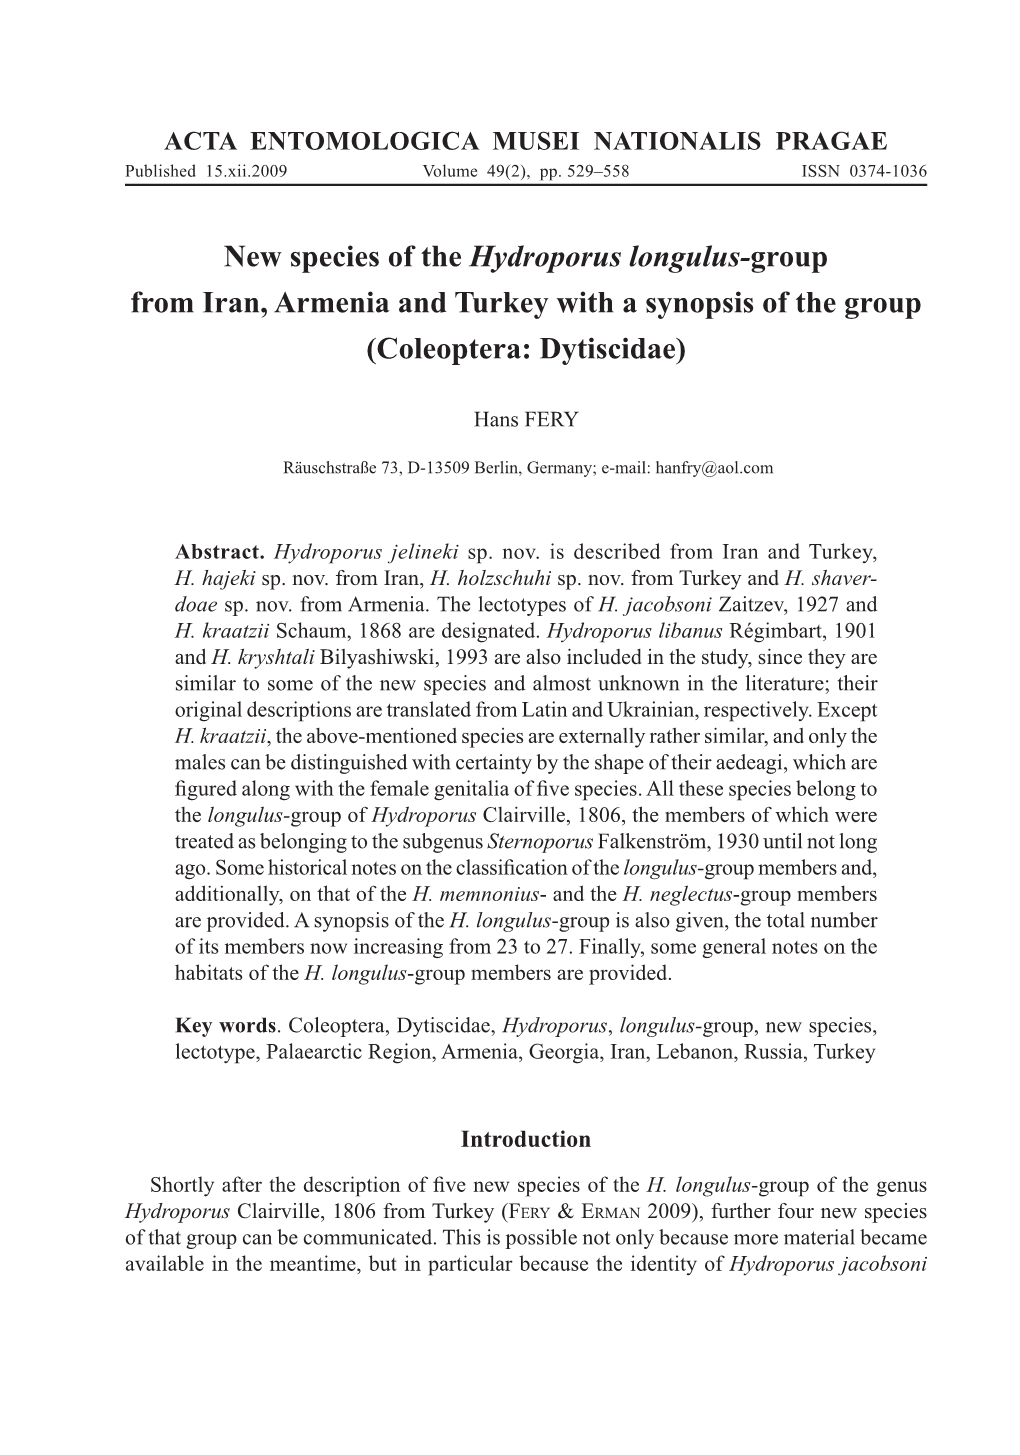 New Species of the Hydroporus Longulus-Group from Iran, Armenia and Turkey with a Synopsis of the Group (Coleoptera: Dytiscidae)